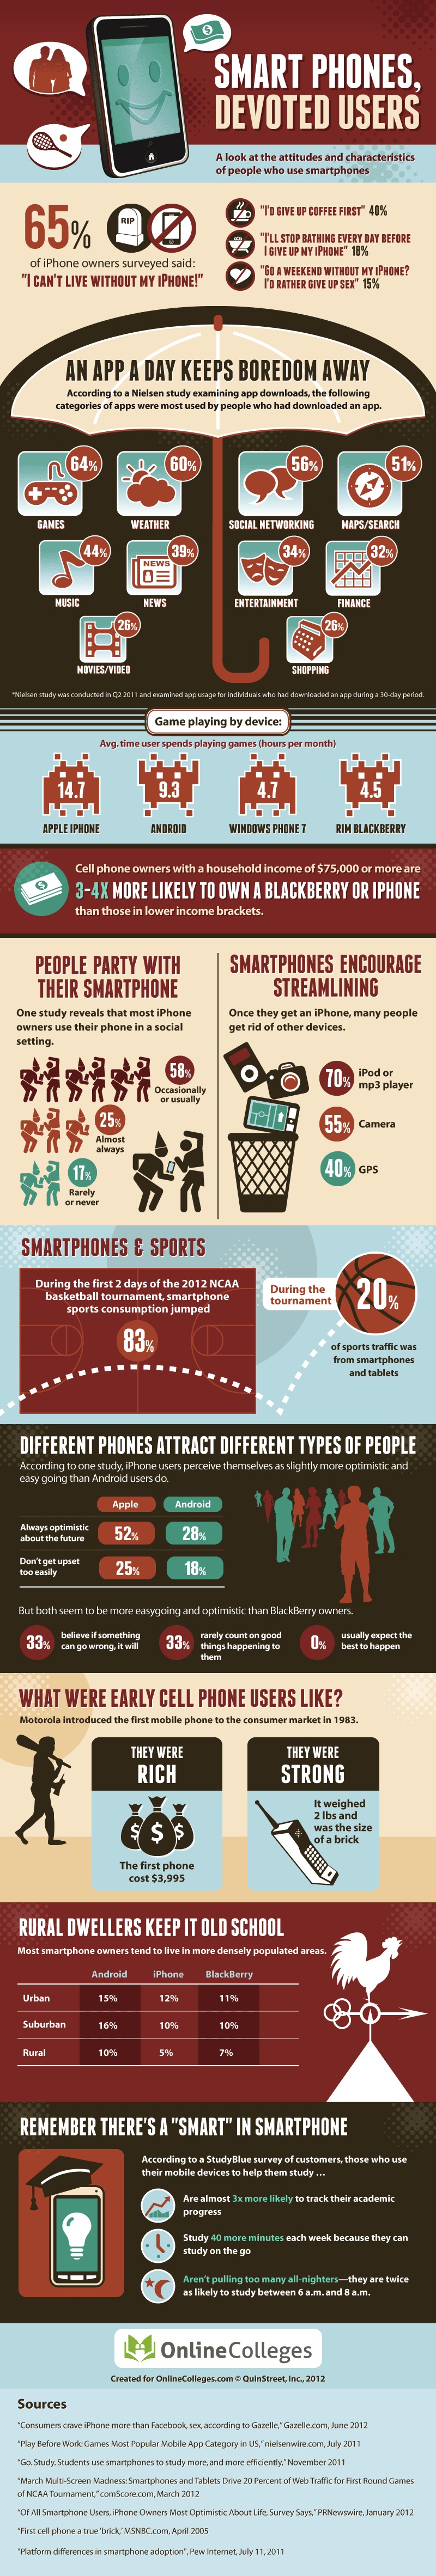 smartphone-devoted-users-infographic